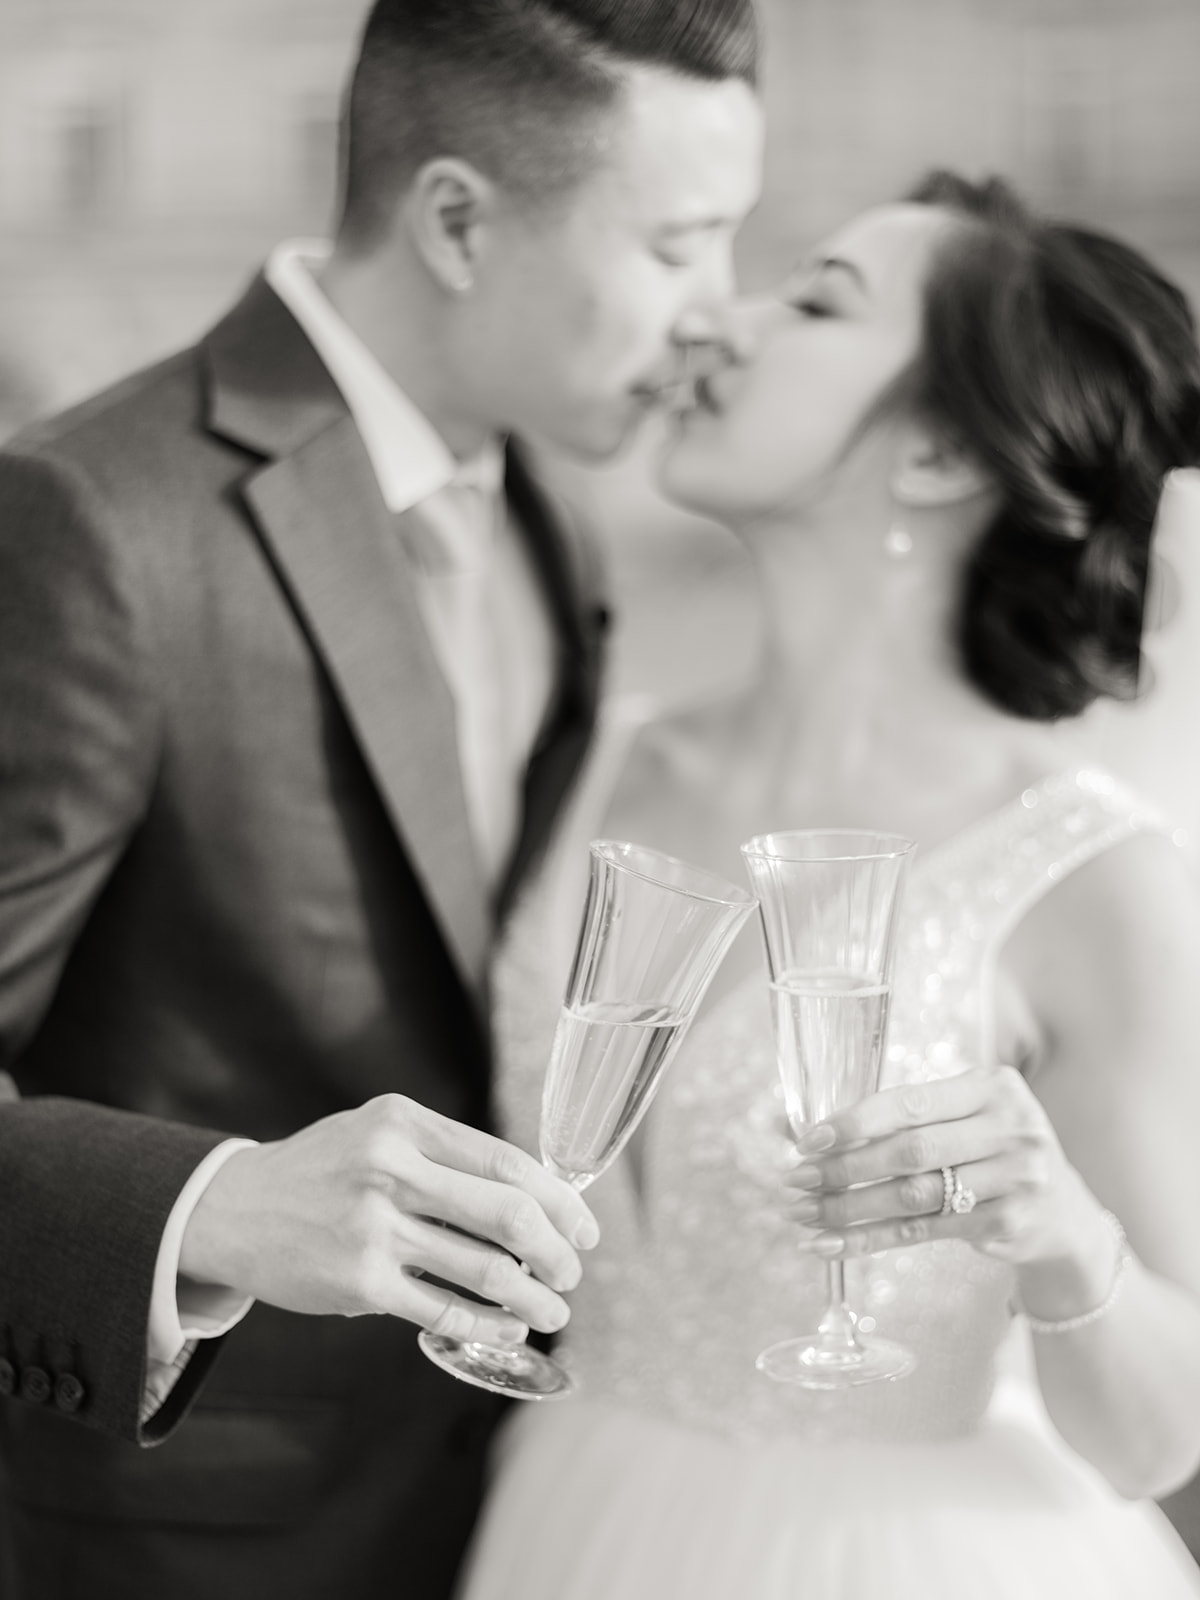 Couple kissing with a glass of champagne in hand